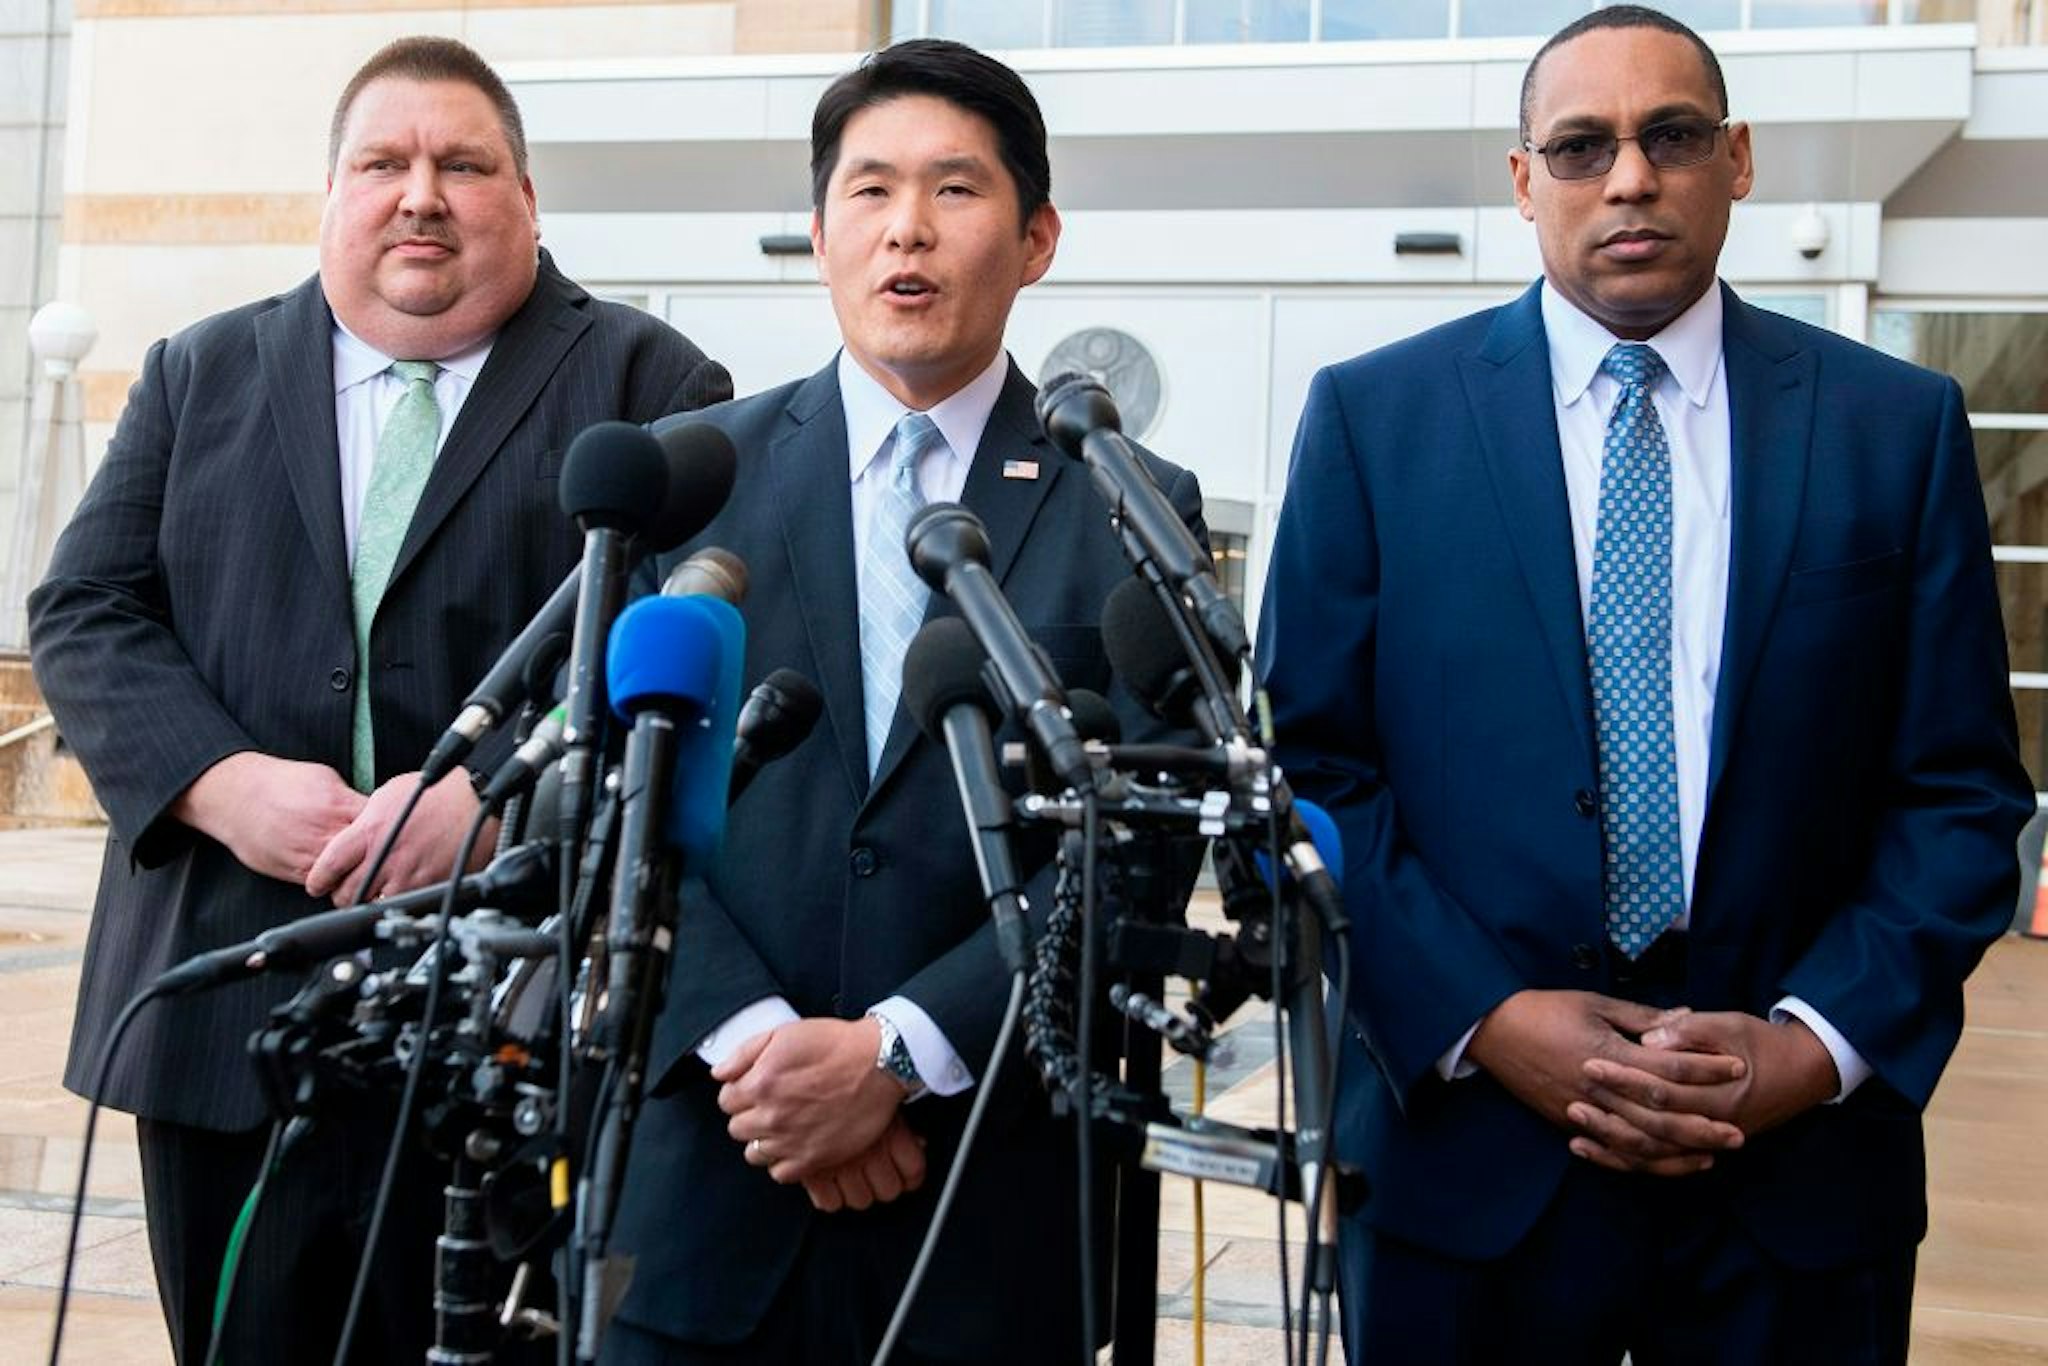 US Attorney for Maryland Robert Hur (C) speaks with FBI Special Agent In Charge of the Baltimore Field Office Gordon Johnson (R) and US Coast Guard Investigator Art Walker (L) outside the US Court House in Greenbelt, MD, on February 21, 2019, after US Coast Guard Lt. Christopher Hasson, 49, of Silver Spring, Maryland, was arrested last week on illegal weapons and drug charges as a result of an ongoing investigation led by the Coast Guard Investigative Service, in cooperation with the FBI and Department of Justice. (Photo by Jim WATSON / AFP)